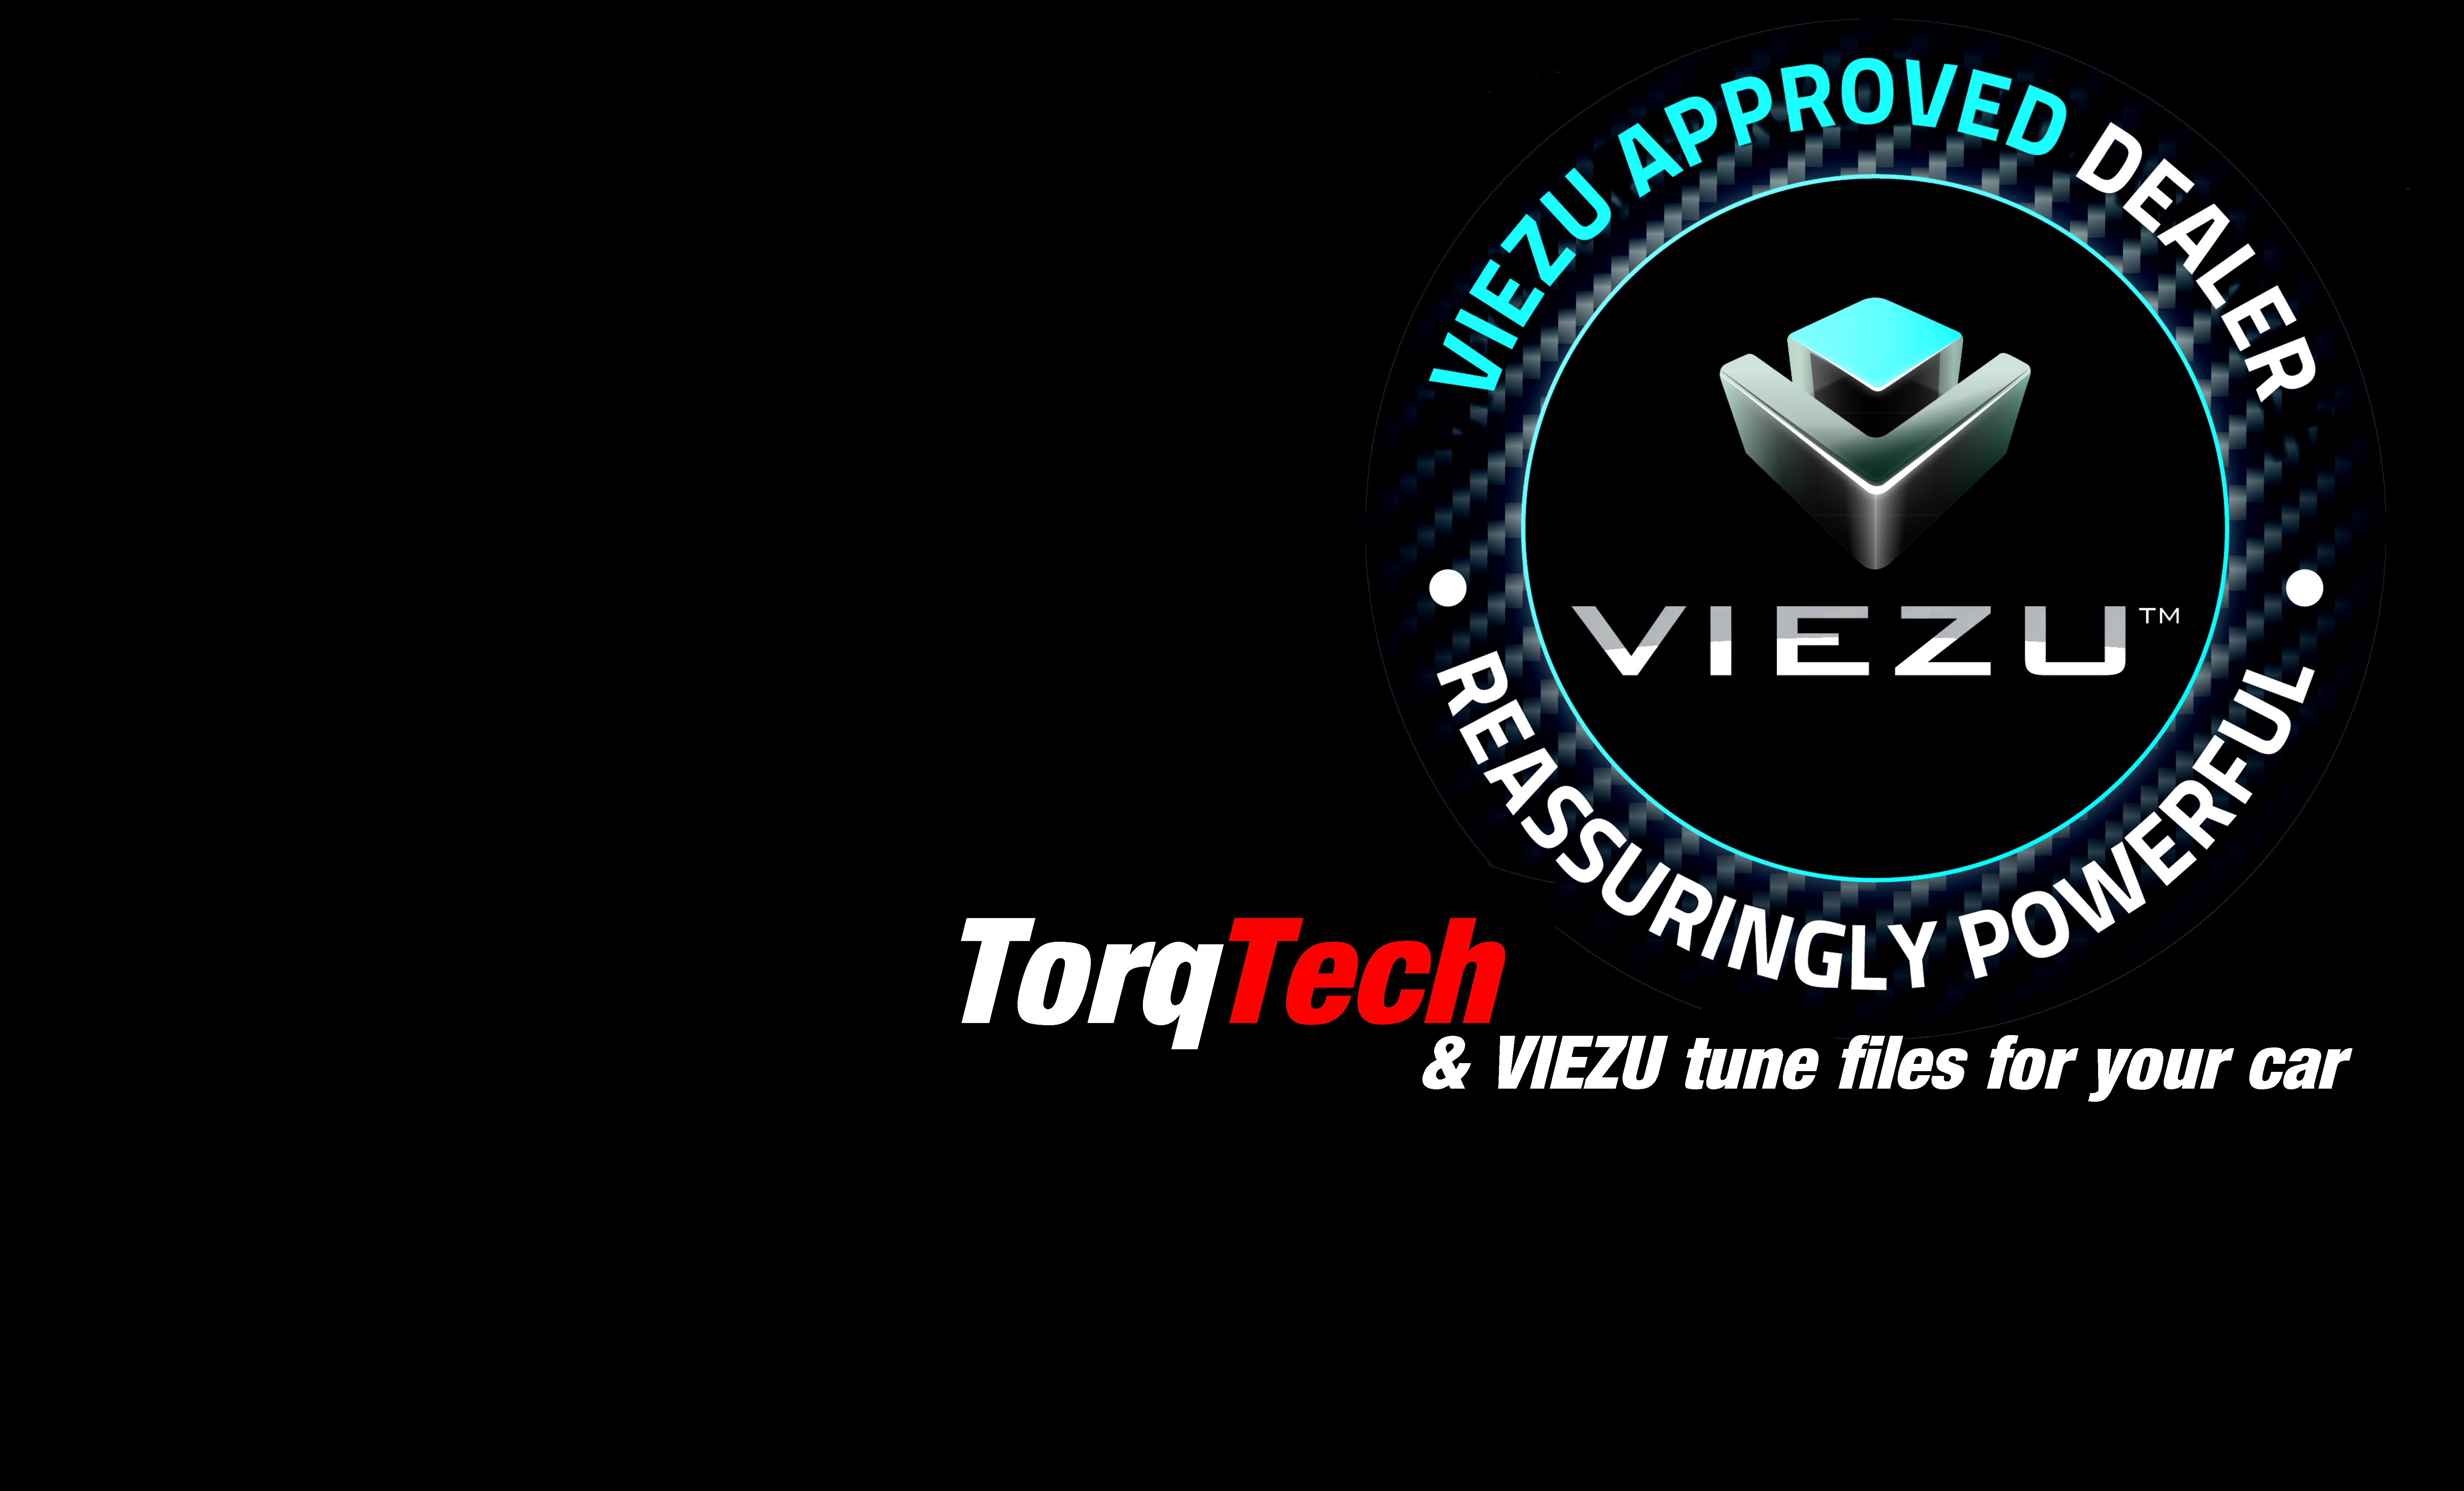 TorqTech utilizes the power of Viezu to provide unsurpassed results with a money back guarantee